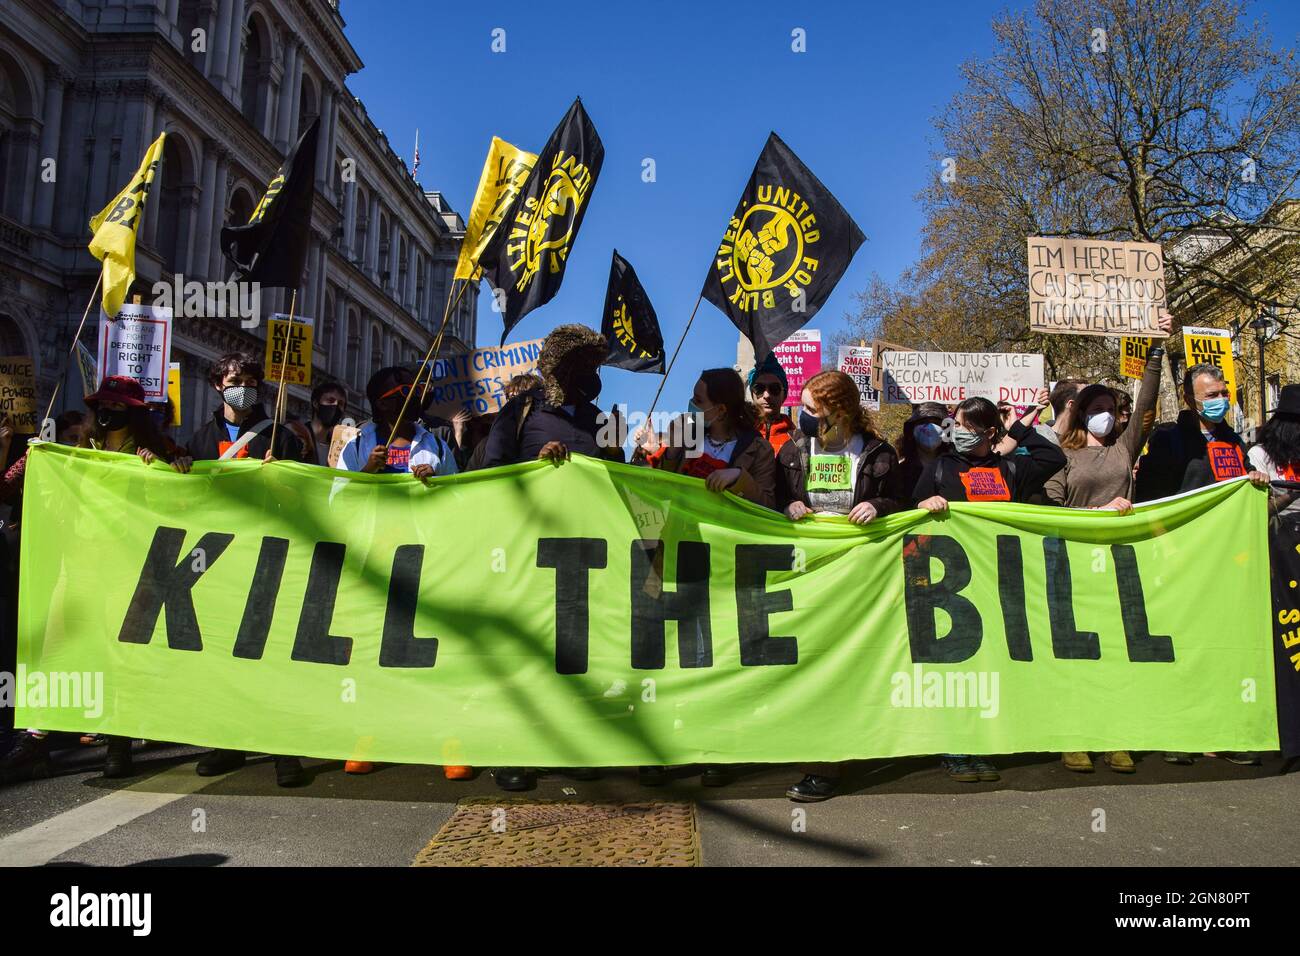 Demonstrators hold a Kill The Bill banner in Whitehall. Crowds marched through Central London in protest of the Police, Crime, Sentencing and Courts Bill. London, United Kingdom. 17th April 2021. Stock Photo